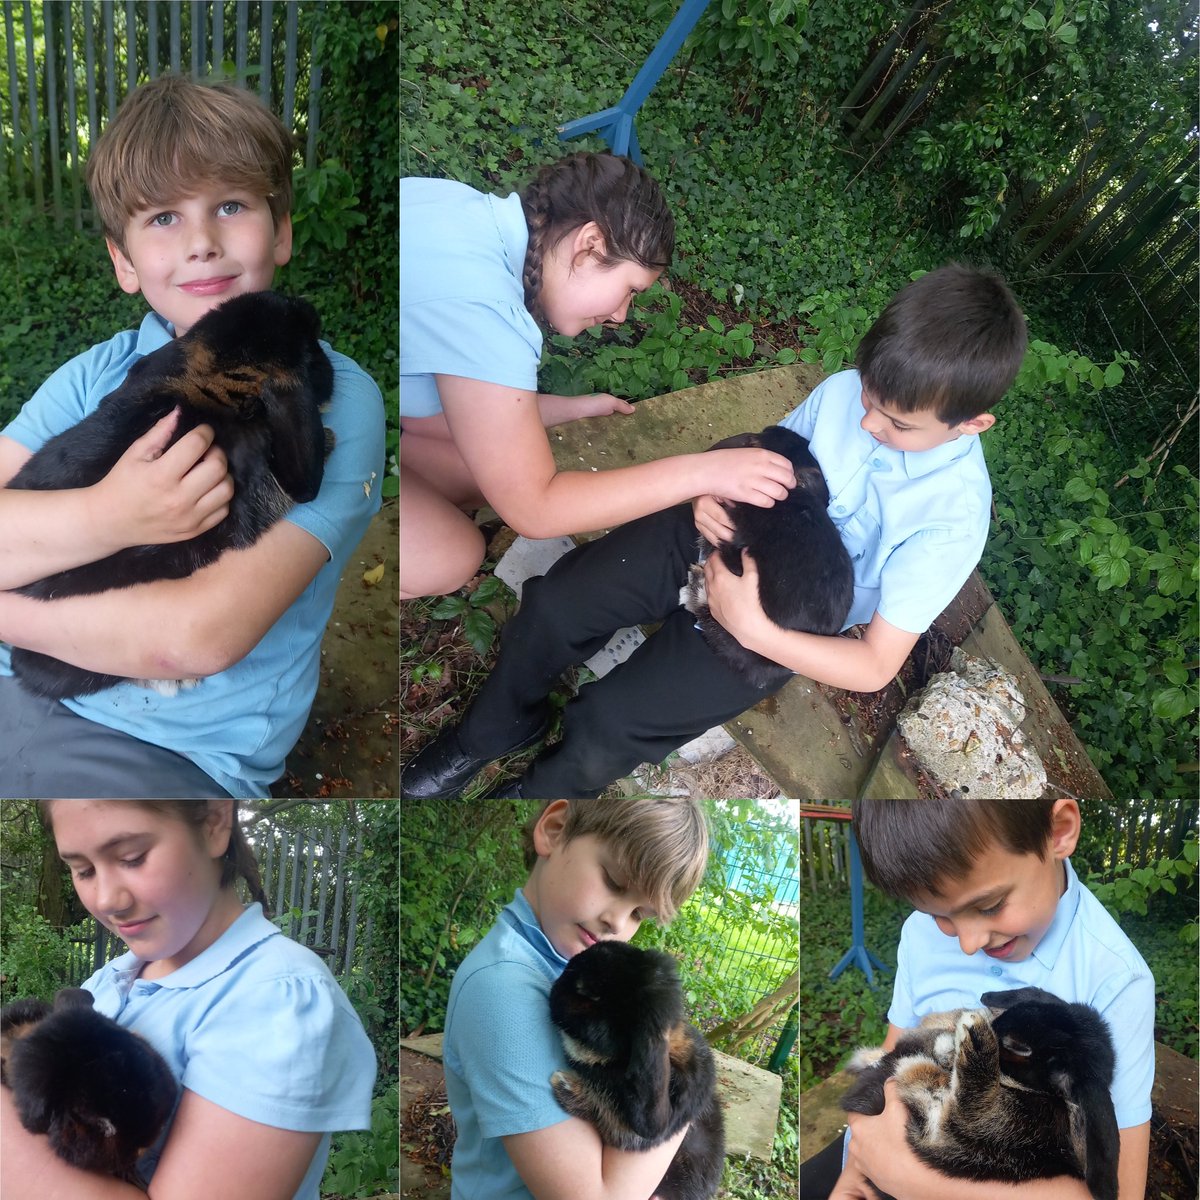 It's been a while since we visited Kylo the rabbit. Today, we spent some time taking turns to give Kylo lots of cuddles and show how kind we can be when taking turns! #ThisisAP #Interventions